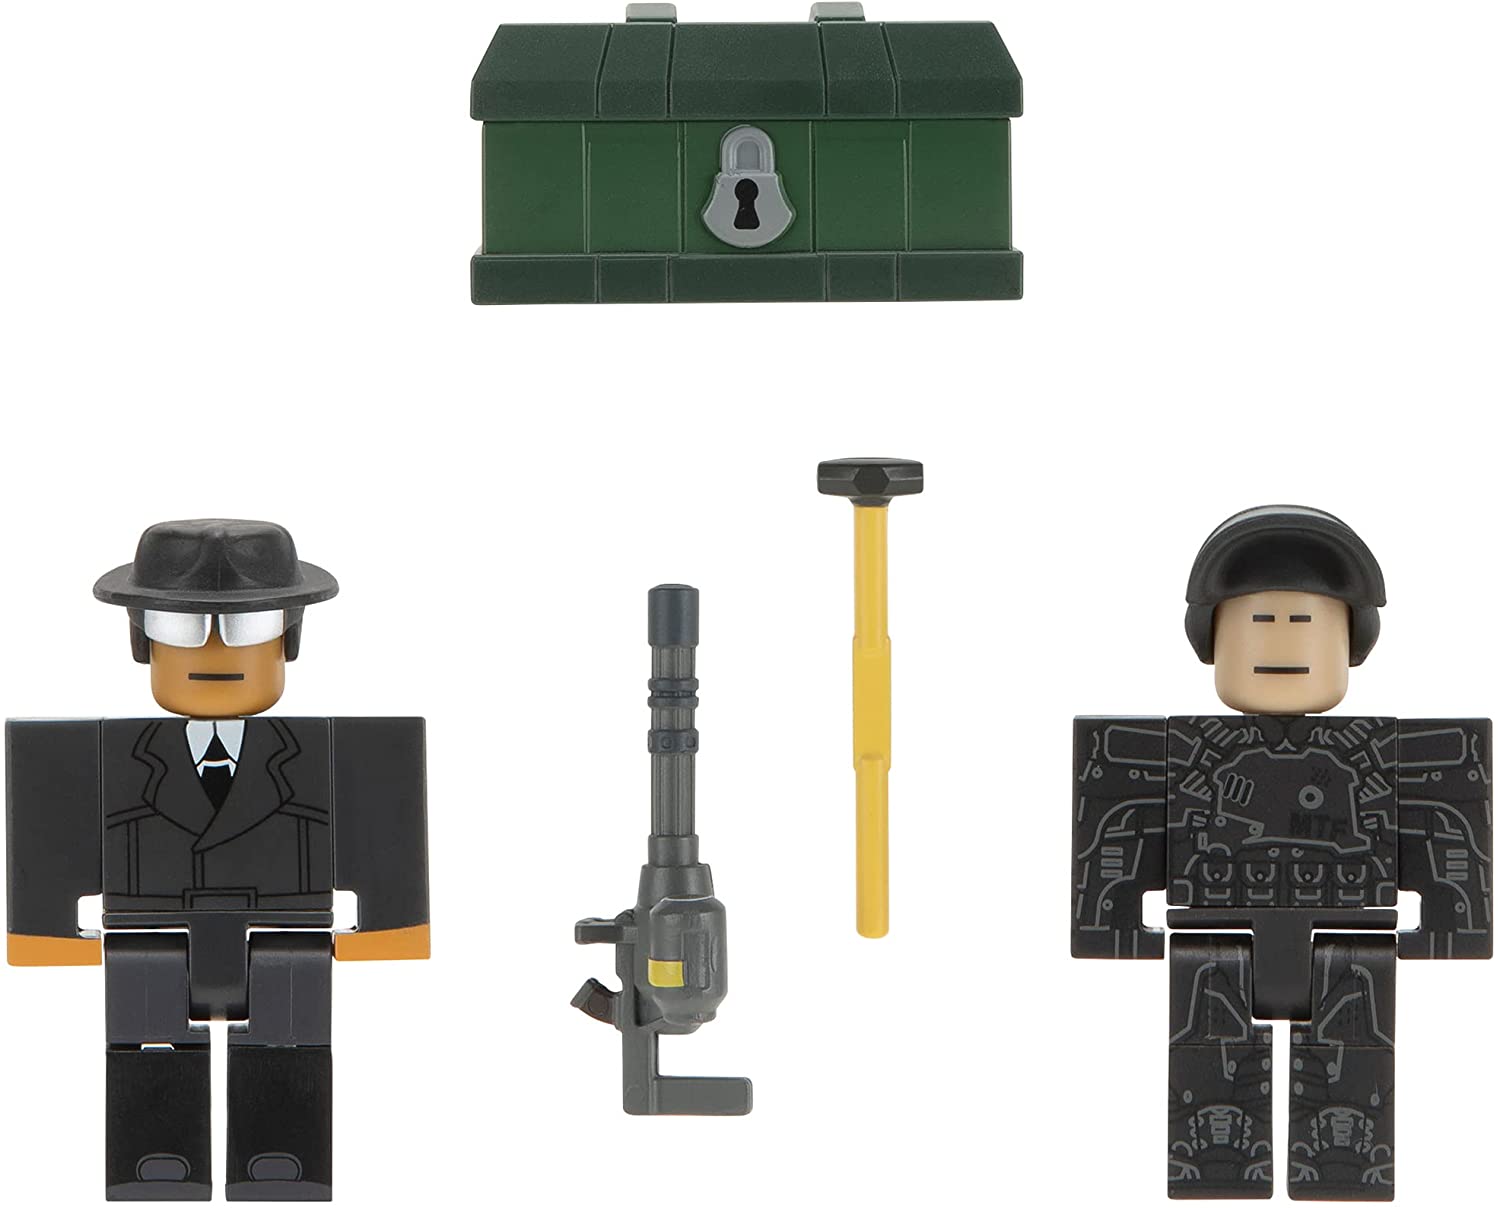 Roblox Toys in Roblox 